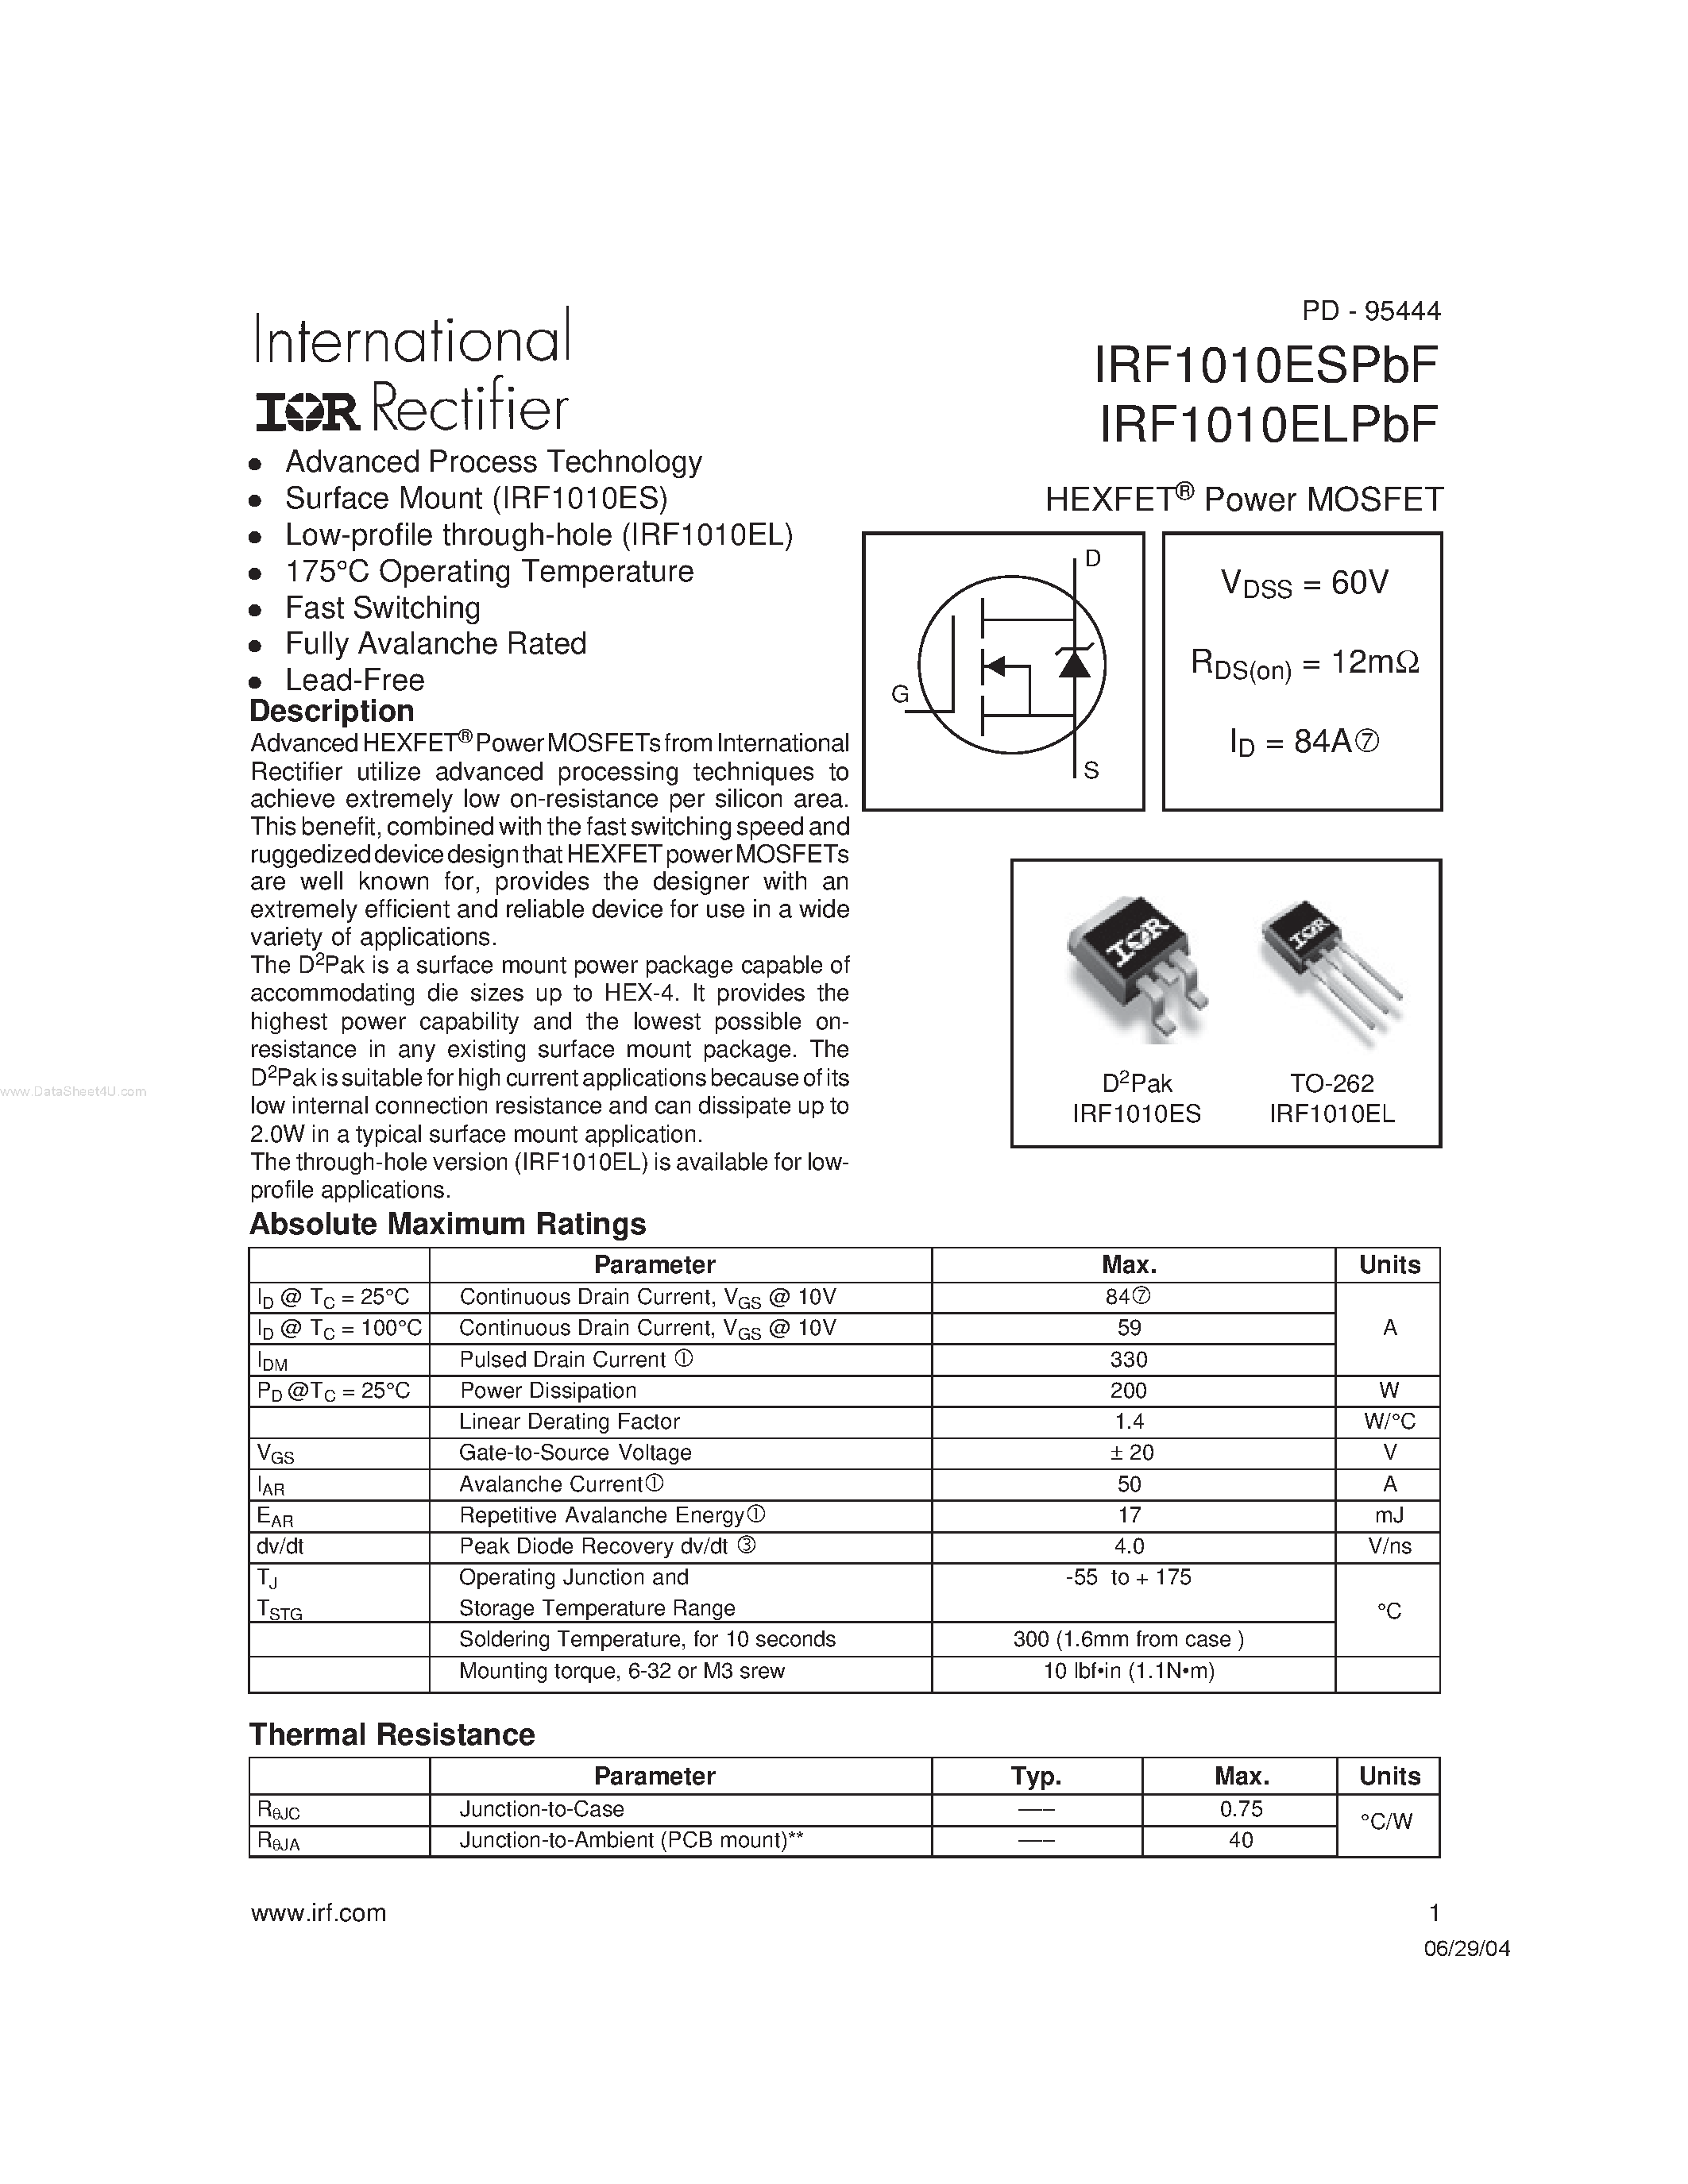 Datasheet IRF1010ELPbF - HEXFET Power MOSFET page 1